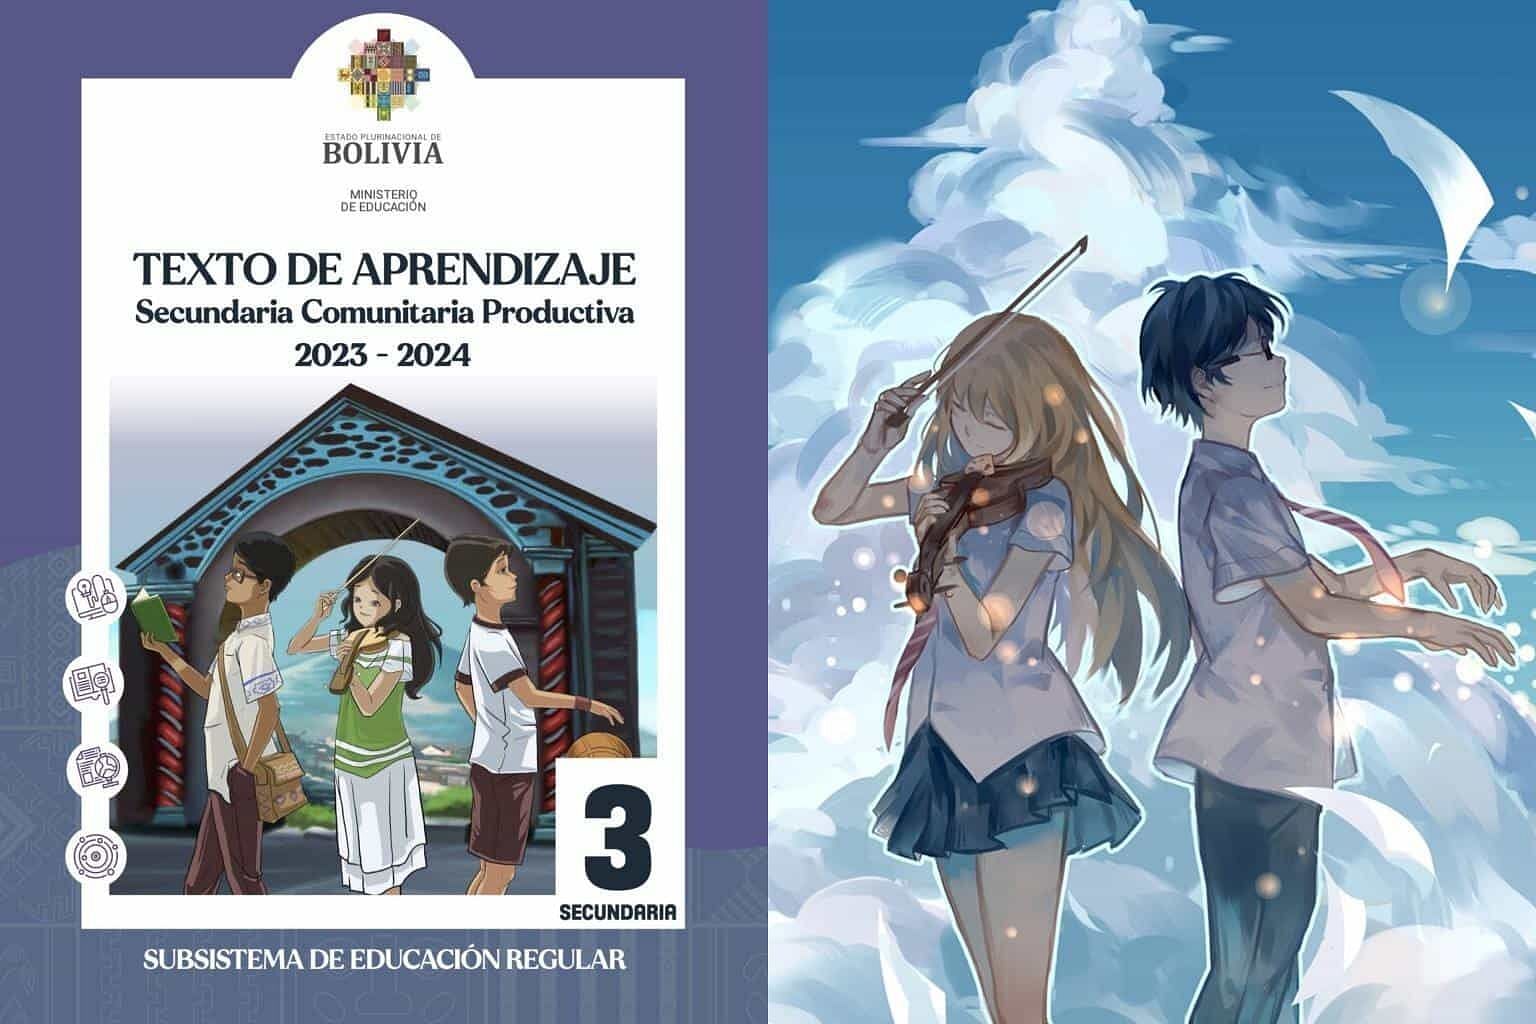 3rd grade textbook in Bolivia that plagiarized the key visual from Your Lie in April (Image via Bolivian Ministry of Education, Naoshi Arakawa)